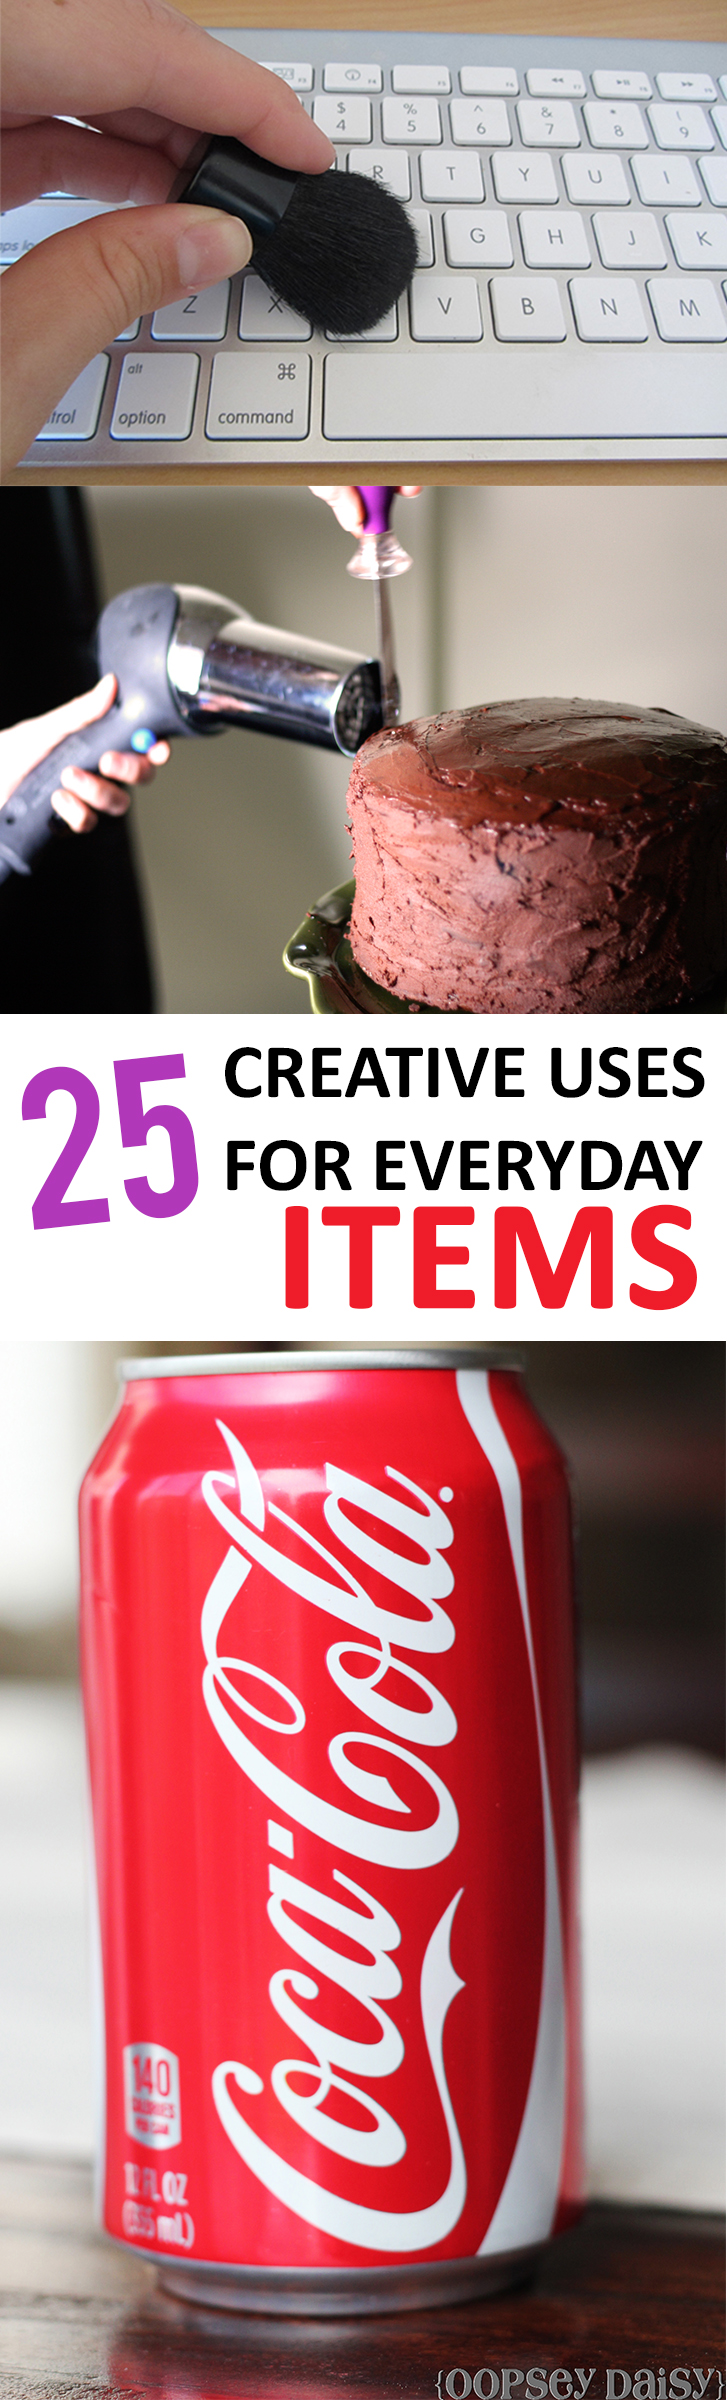 25 Creative Uses for Everyday Items